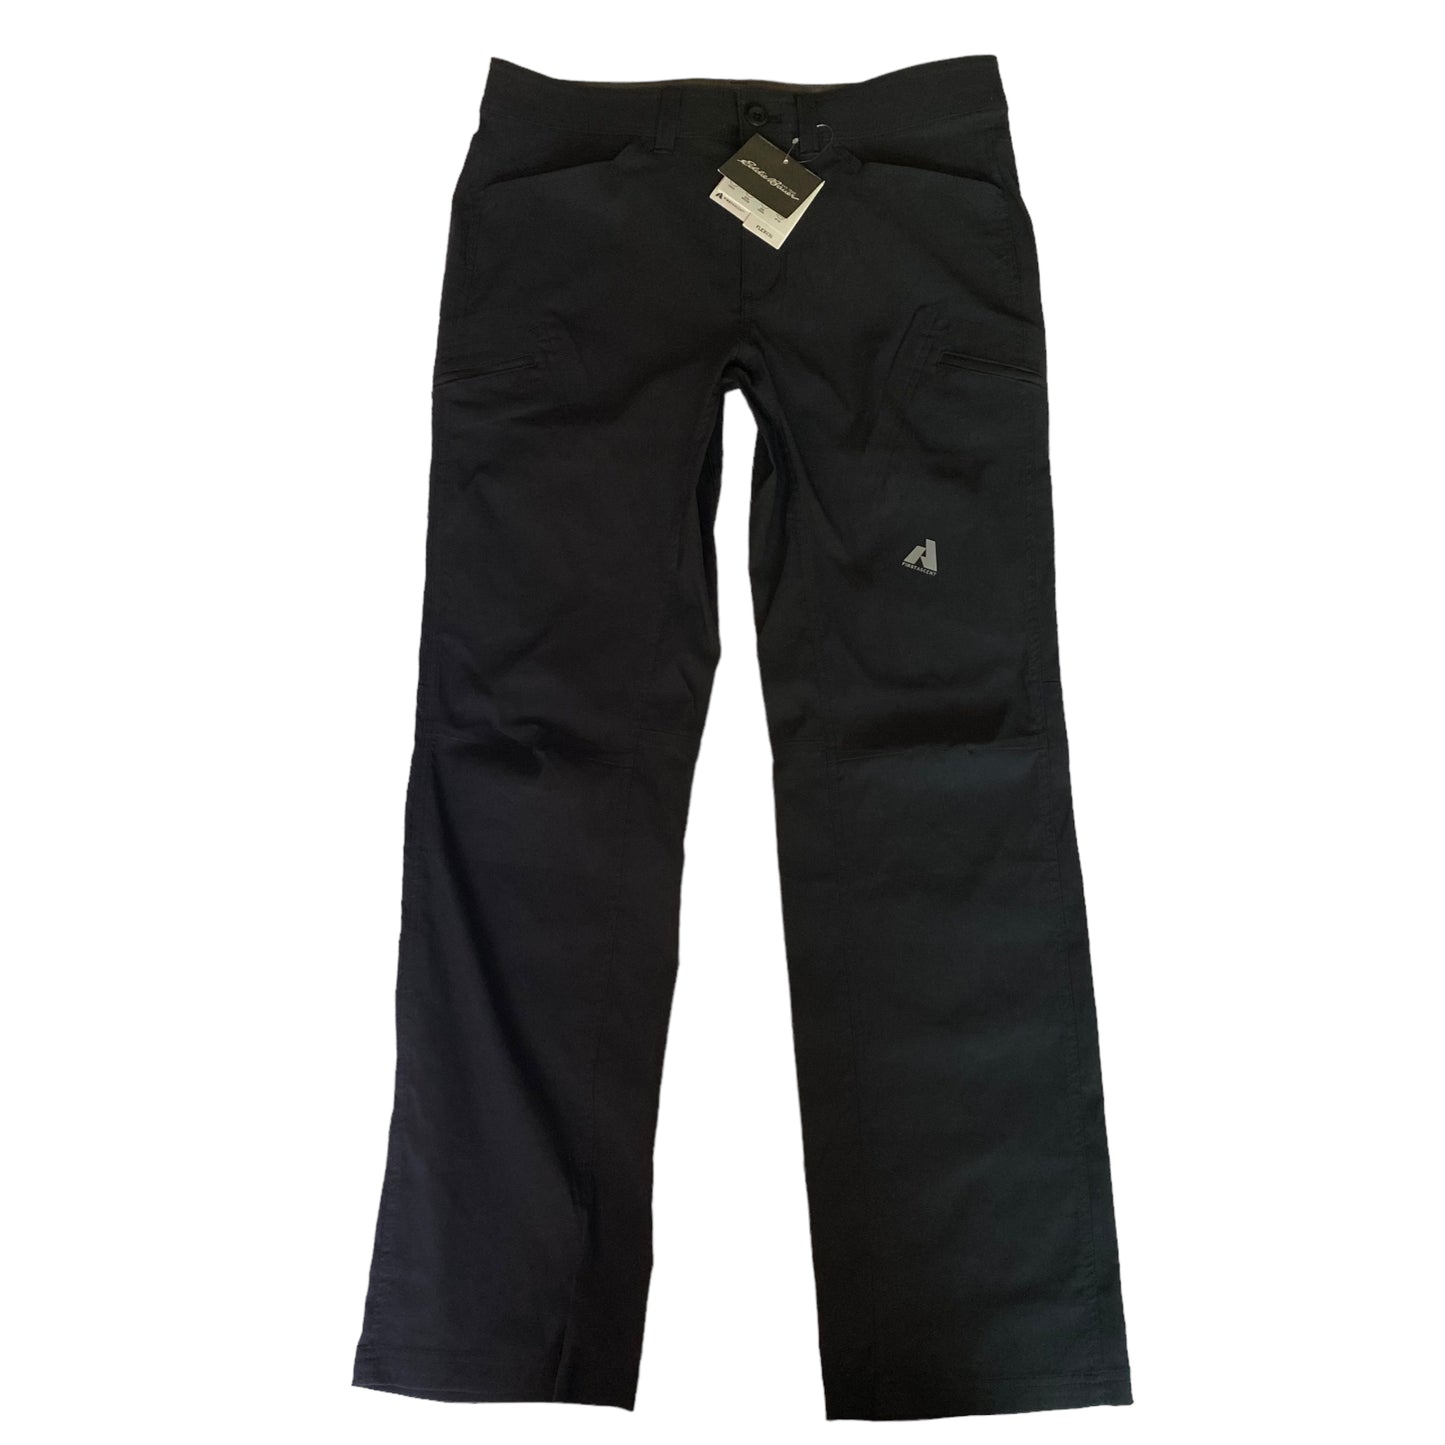 NEW!  Eddie Bauer First Ascent Guide Pro Pants NWT Size 34